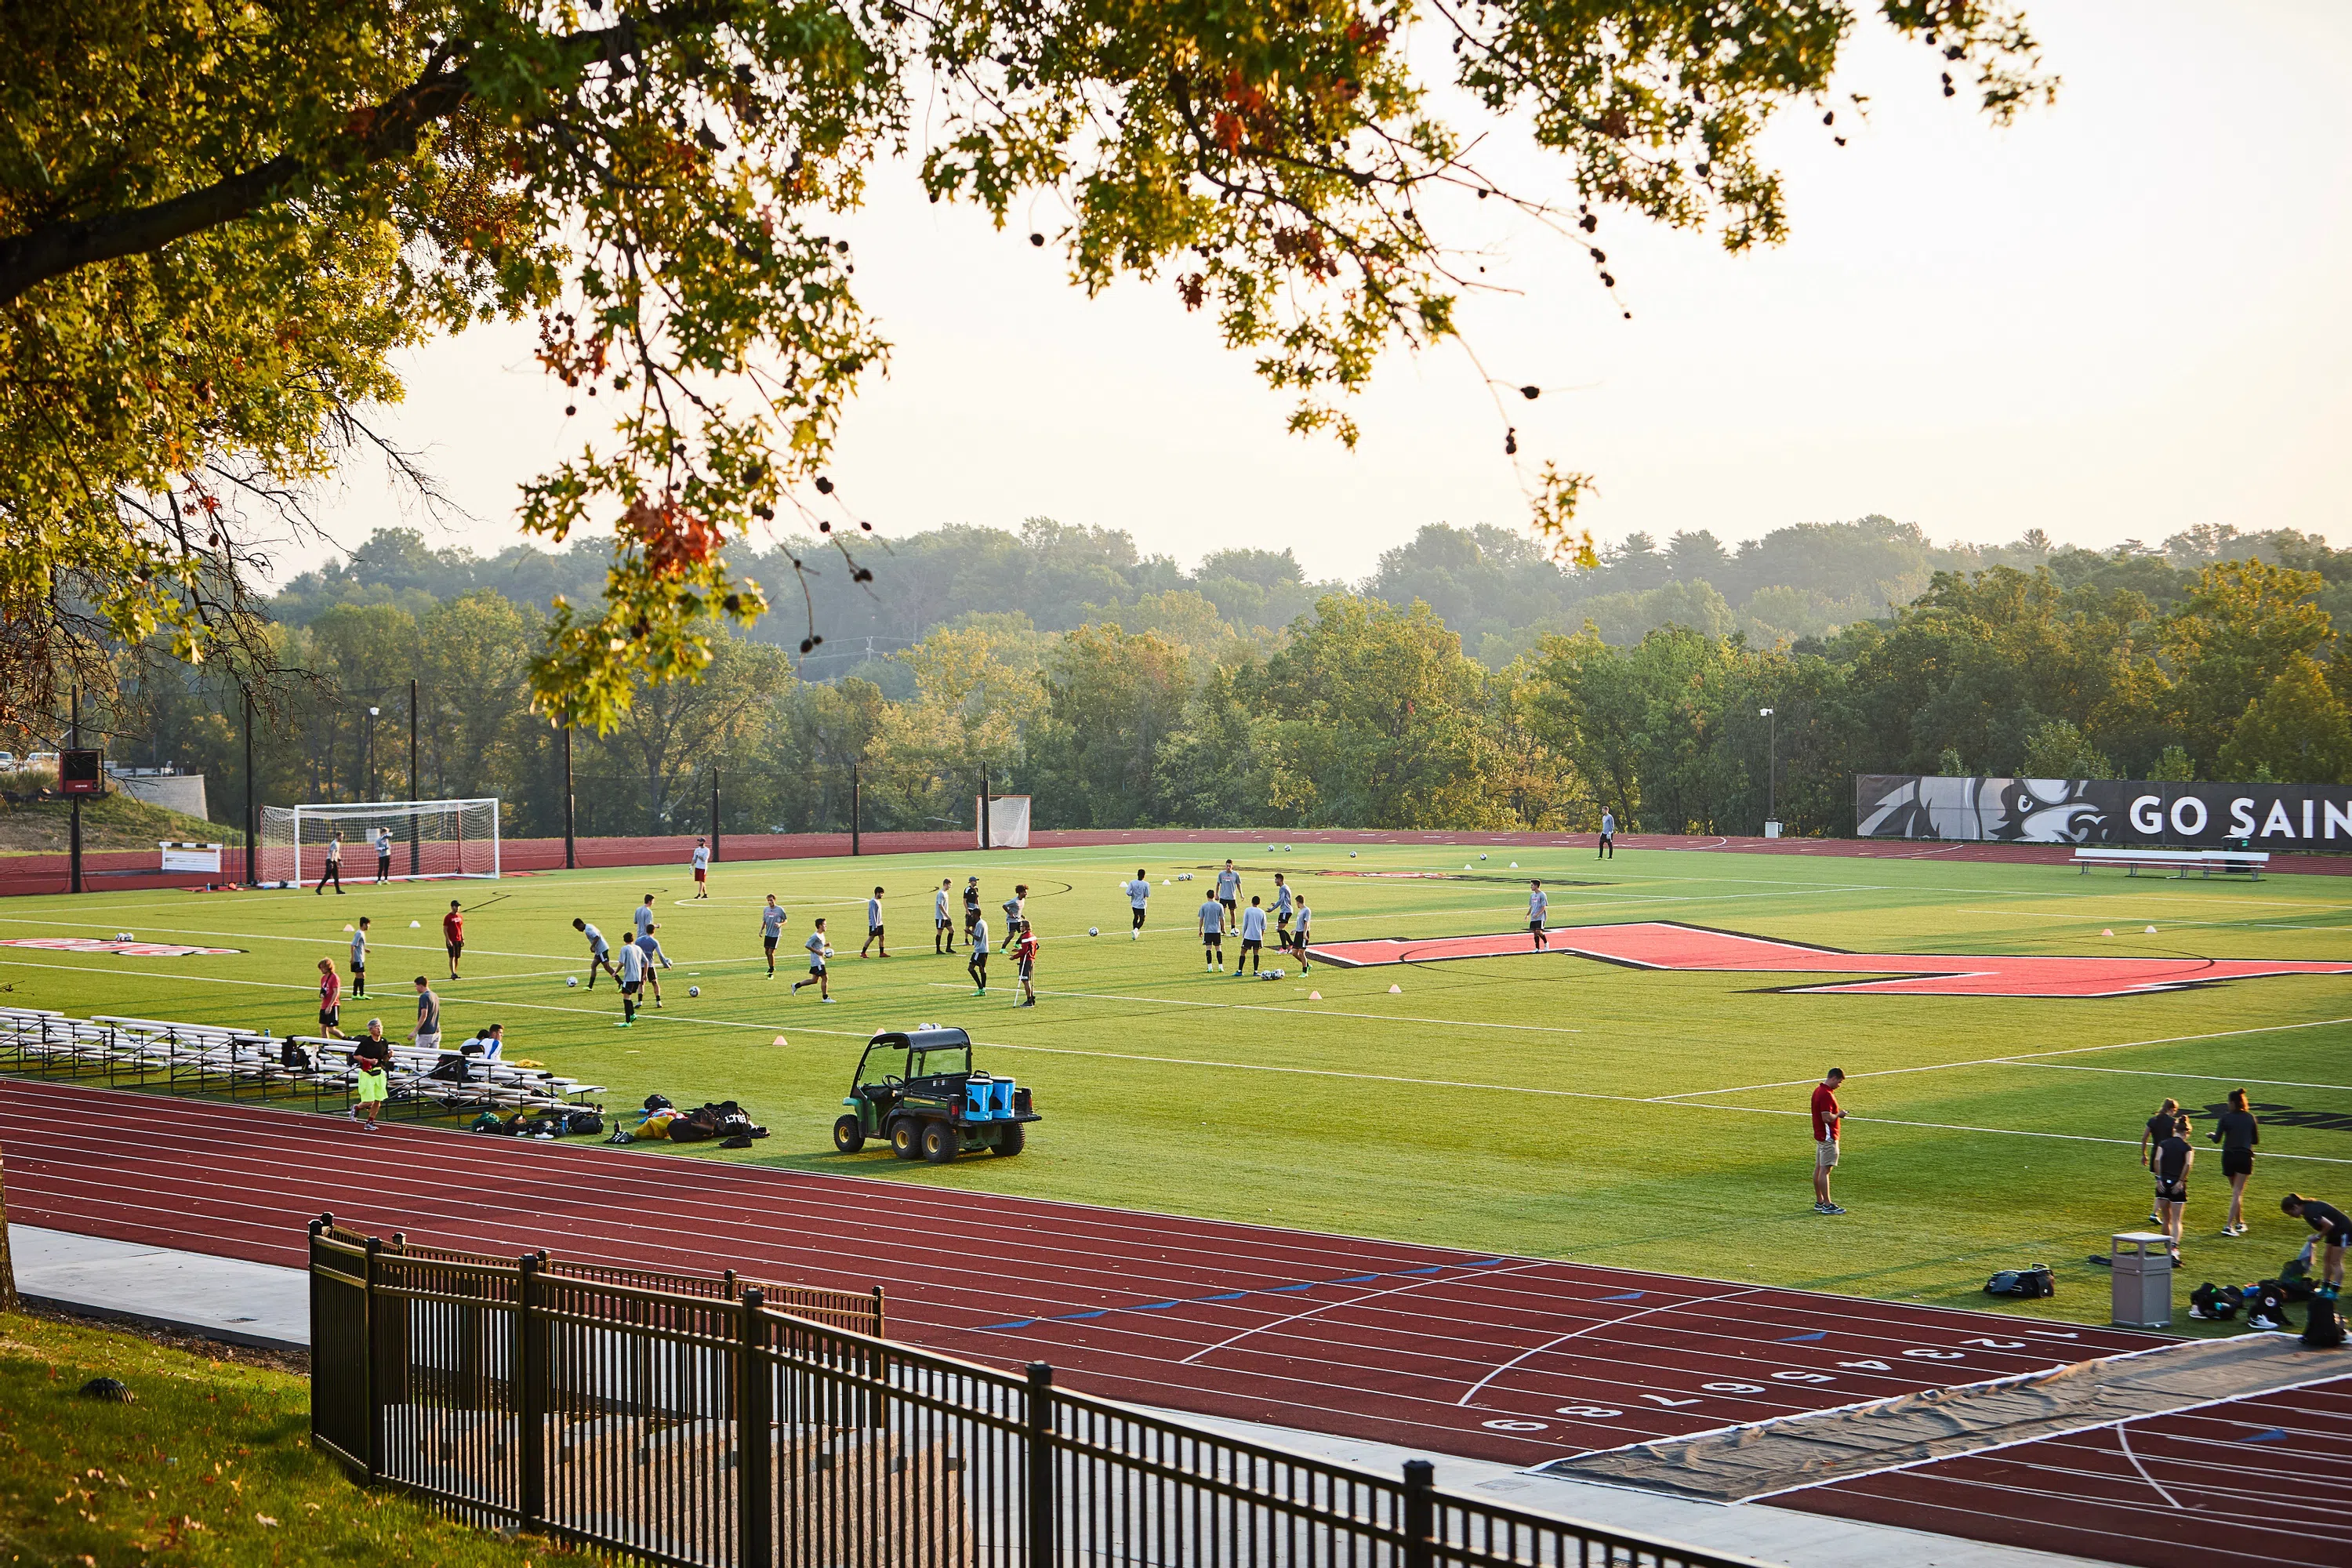 The men's soccer team prepares for a game.